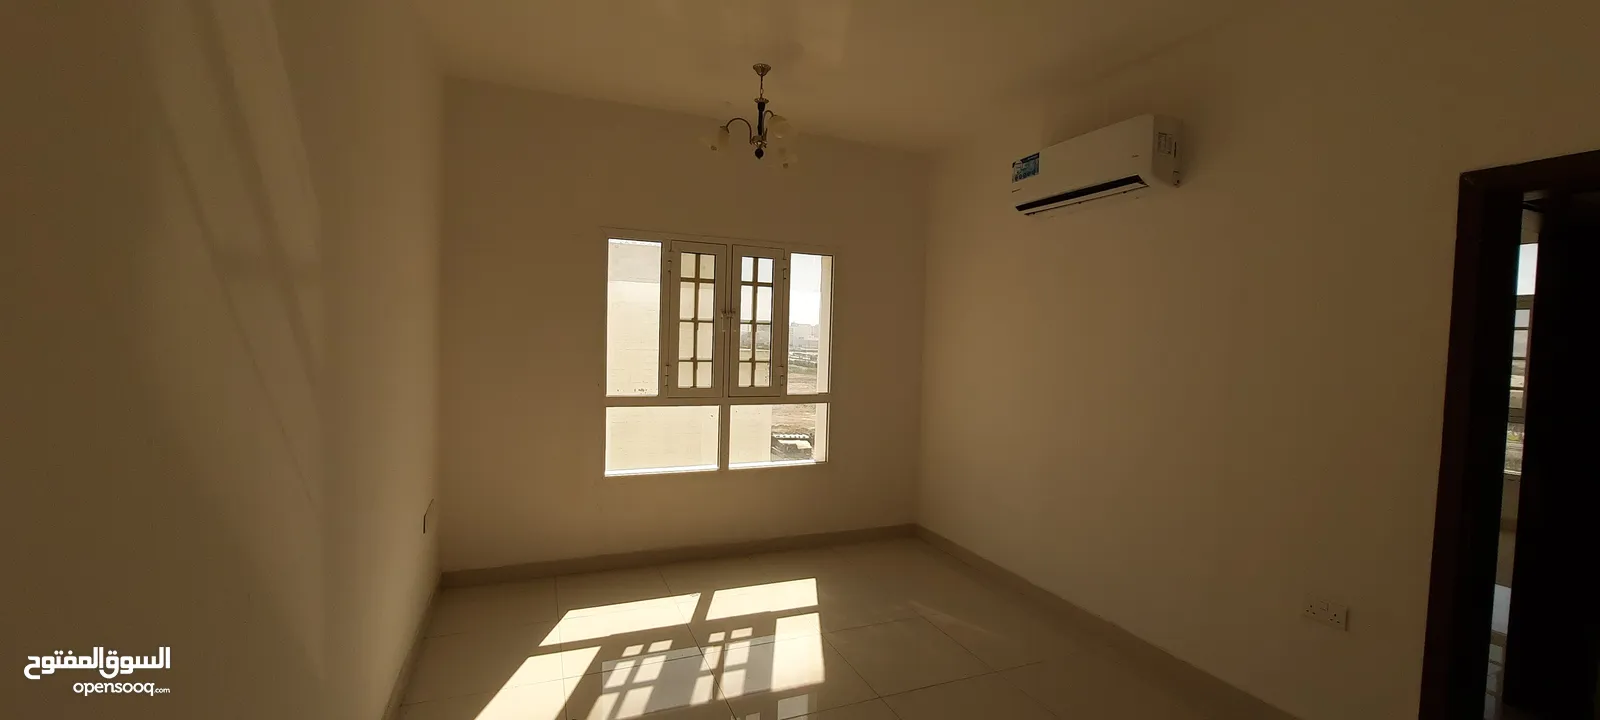 2 BHK 2 Bathroom Apartment for Rent - Al Amerat behind Quality and Savings